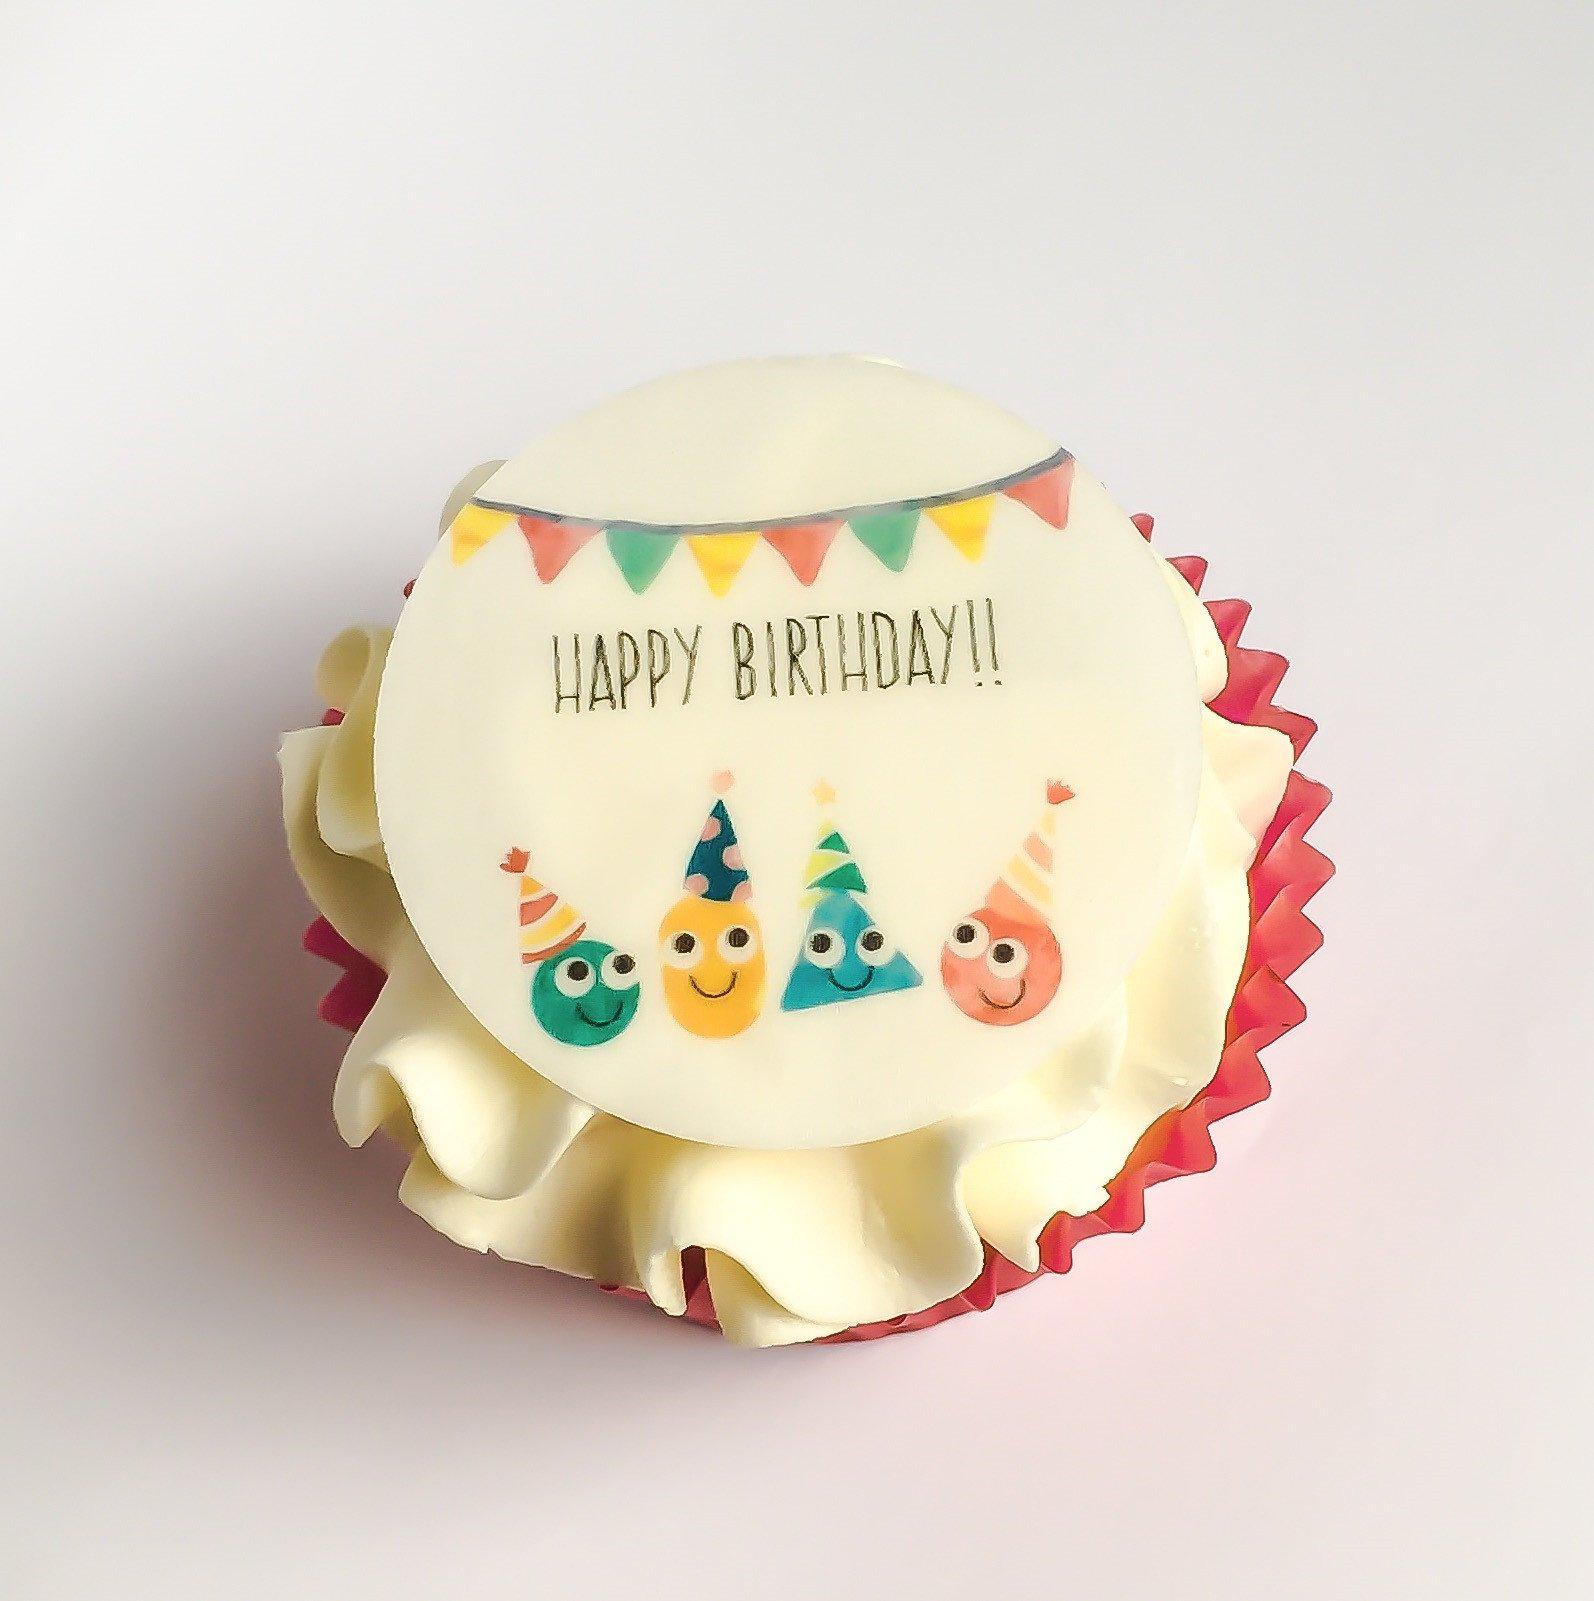 Cute happy birthday cupcake toppers